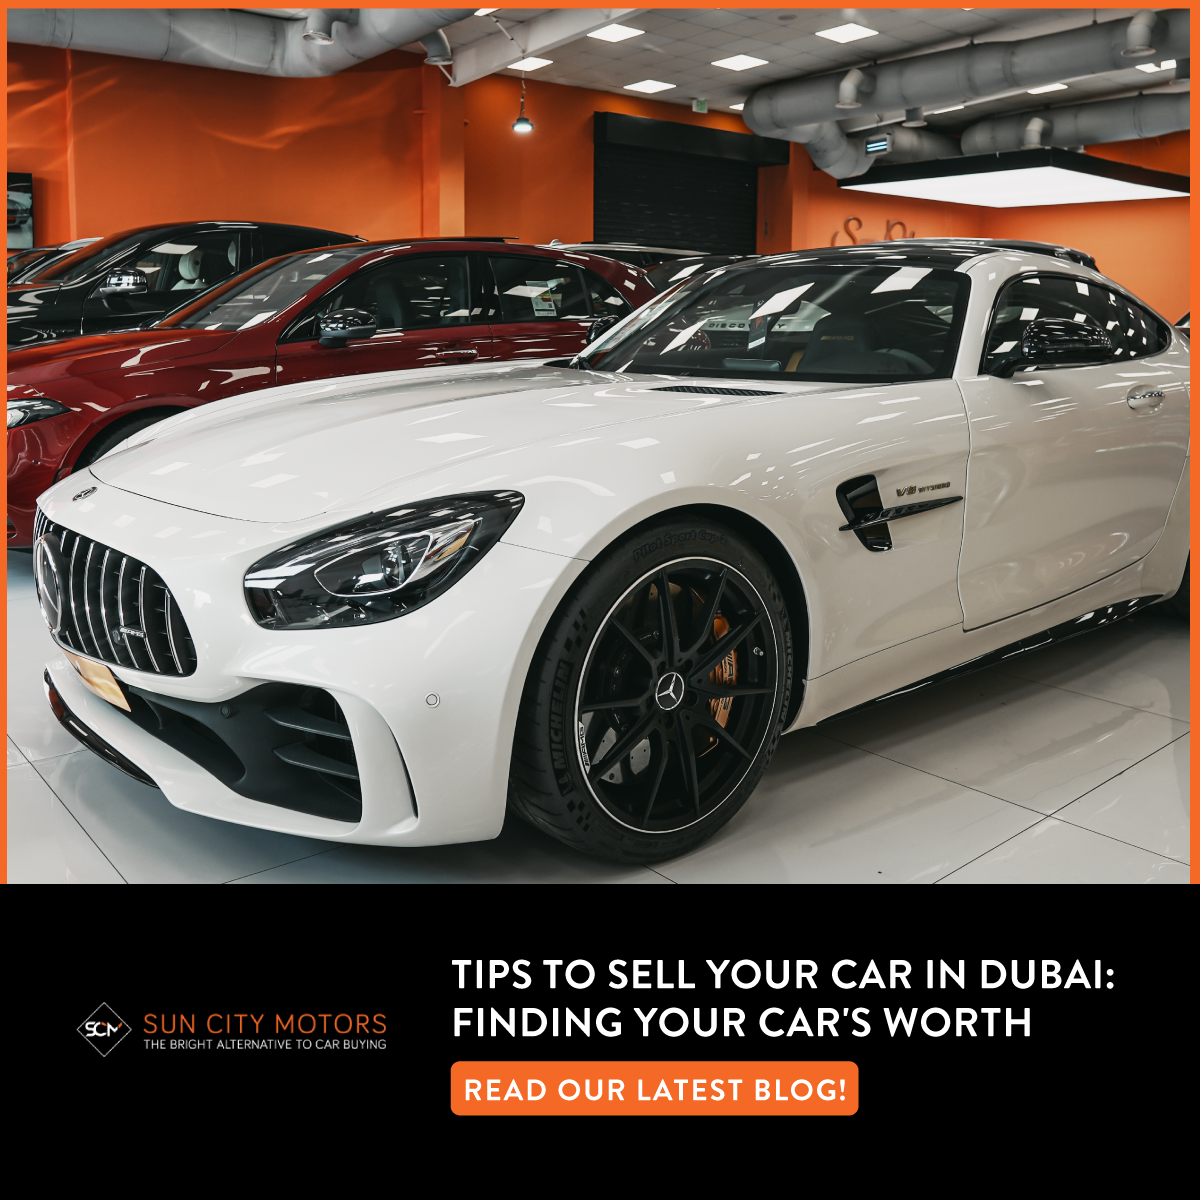 Tips to Sell Your Car in Dubai: Finding Your Car’s Worth